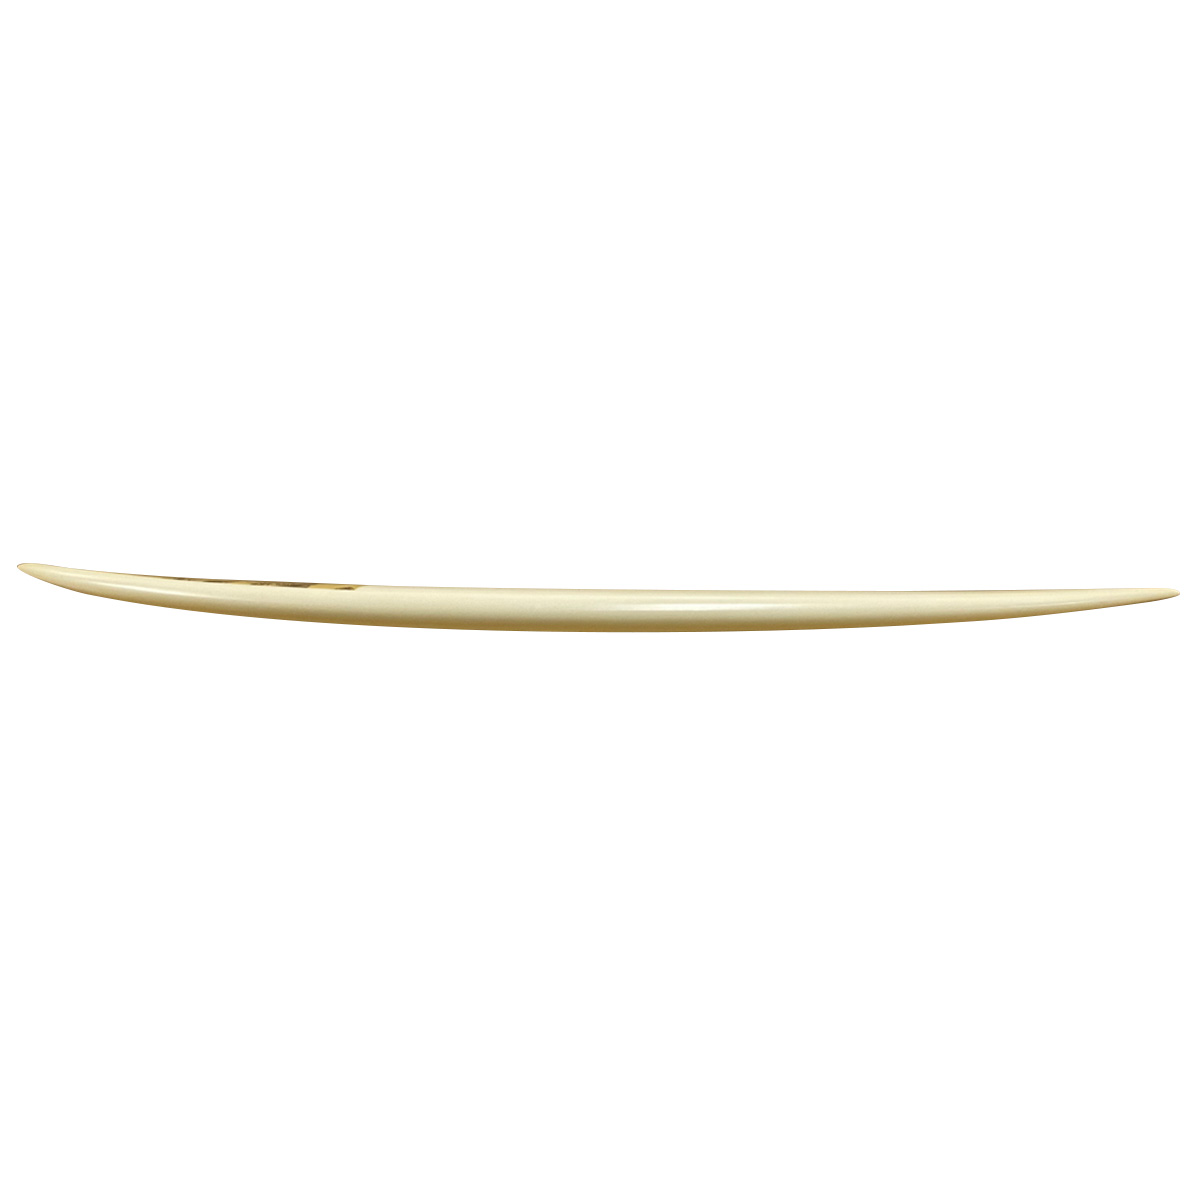 DICK BREWER / Moon Tail 5`10 Shaped By Dick Brewer